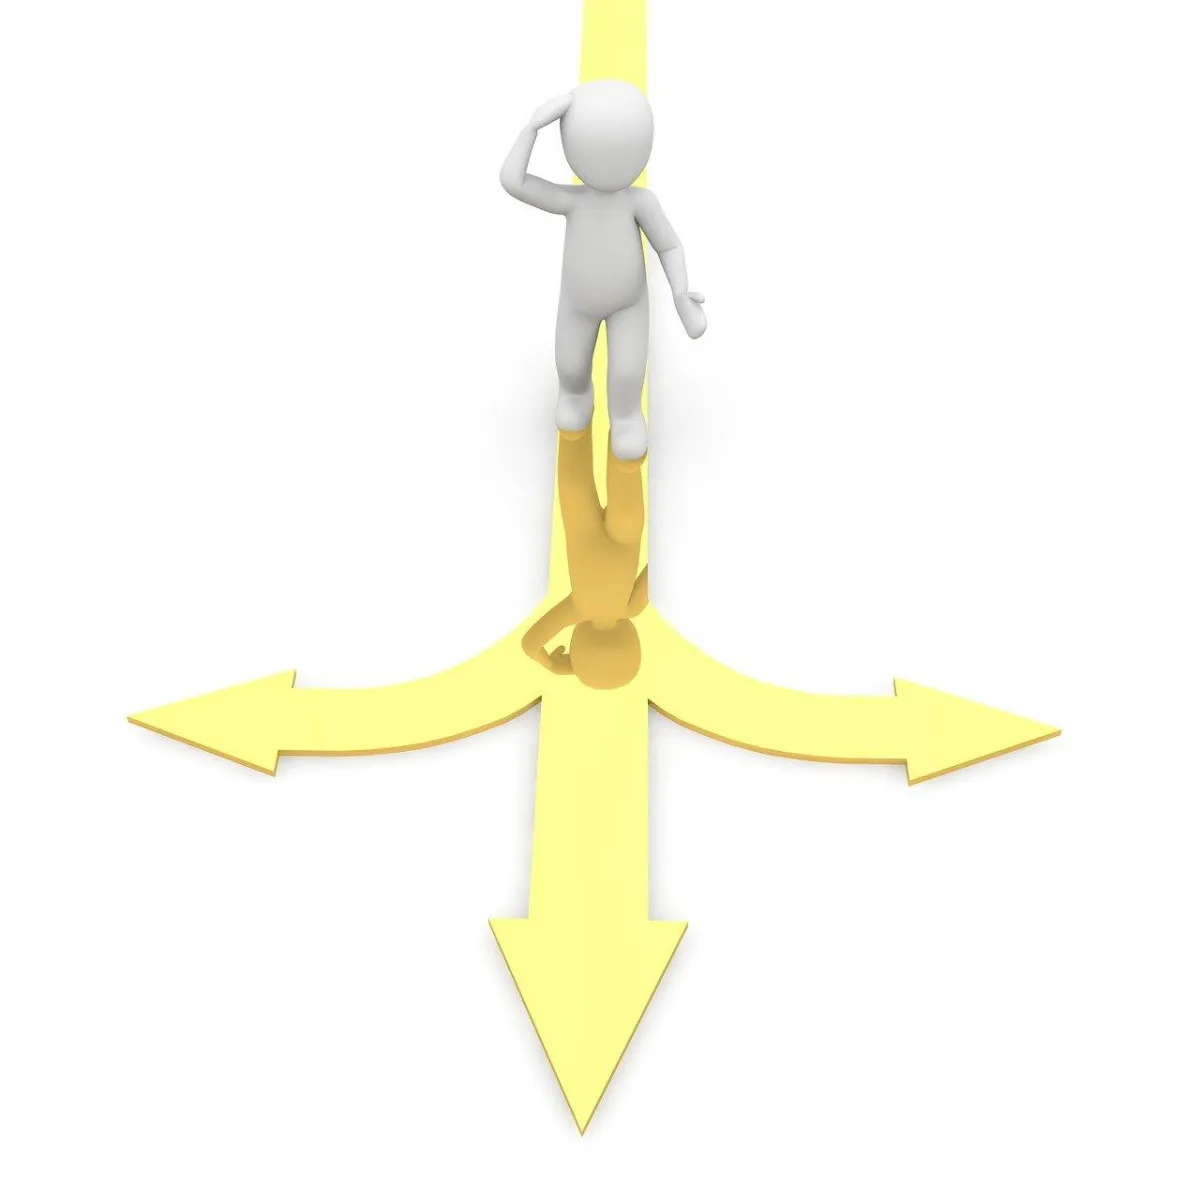 humanoid figure standing on a golden path with three branches, considering which to take.